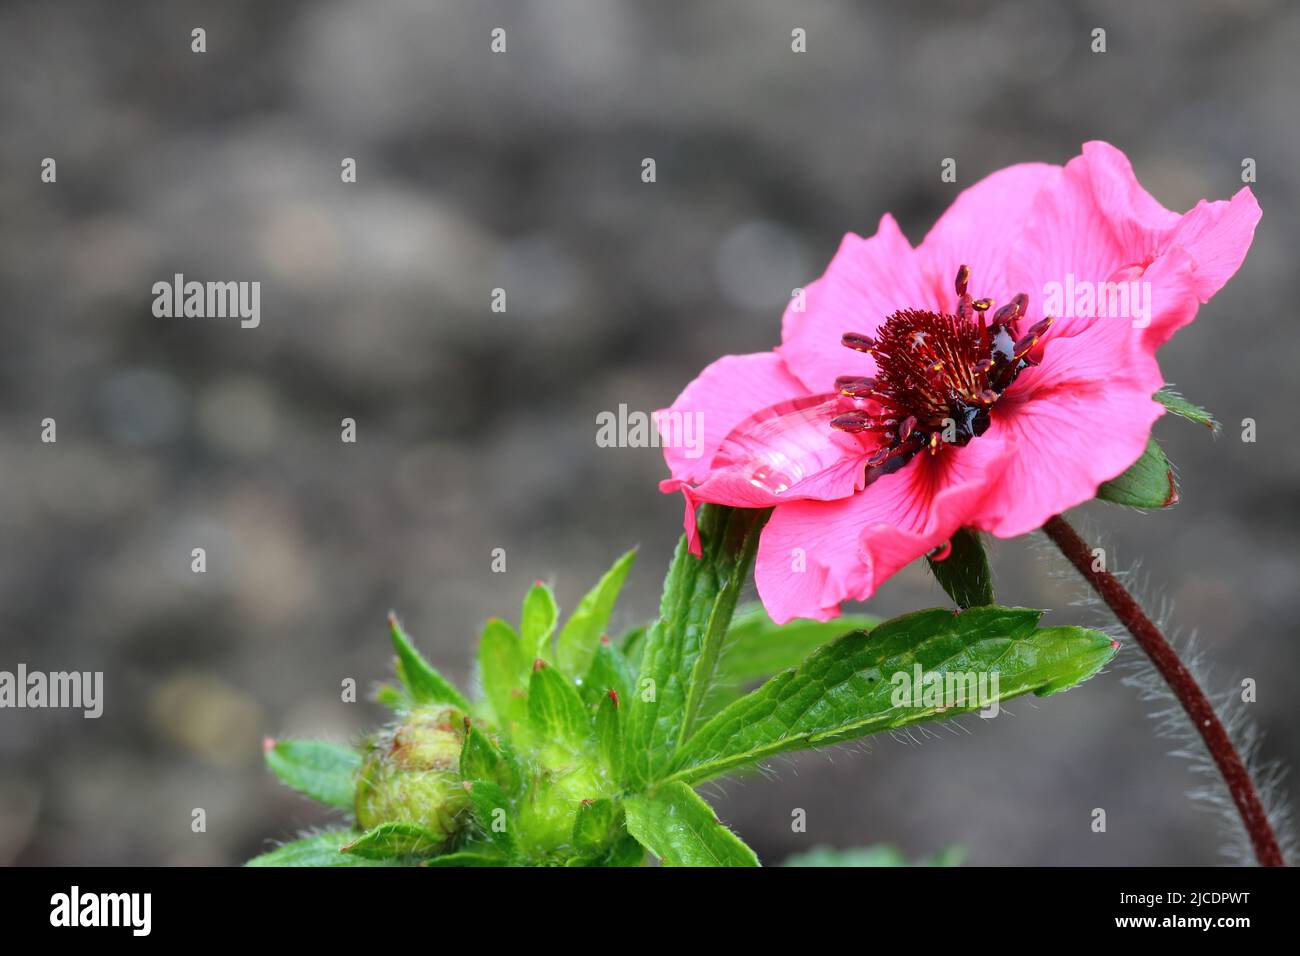 close-up of a beautiful pink potentilla nepalensis flower against a grey blurred background, copy space, side view Stock Photo